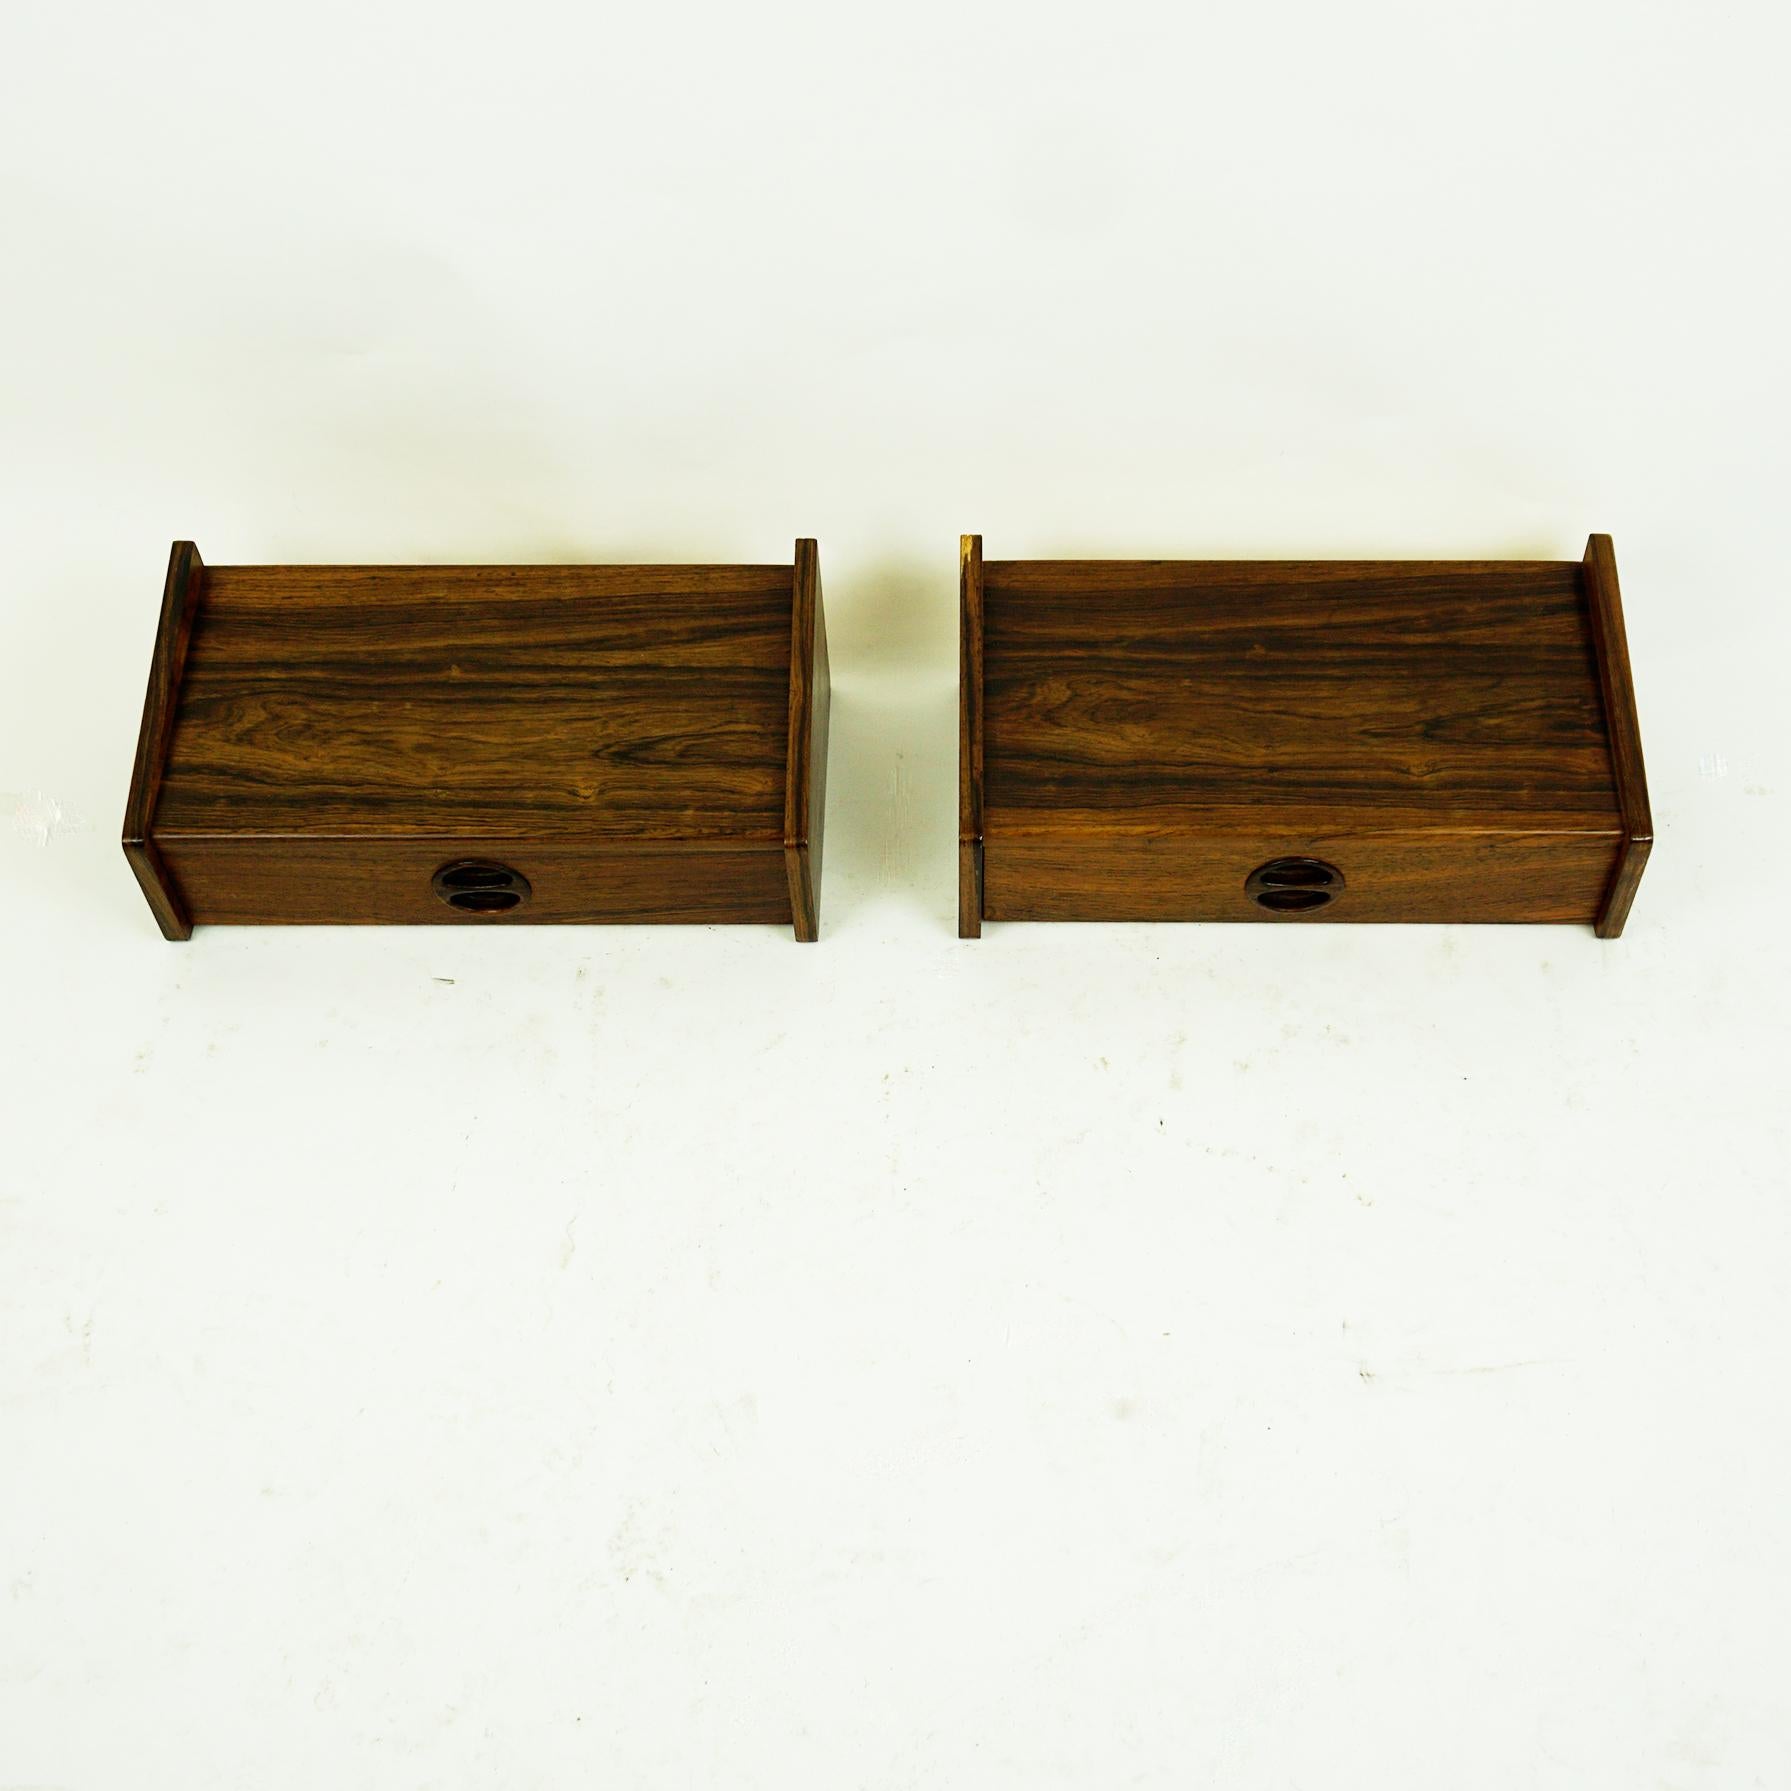 Charming small floating Danish rosewood nightstands ore shelves from the 1950s with a simple streamline design, featuring one drawer each. They can be used as a nightstand or as well in the wardrobe. Authentic example for Danish modern design from